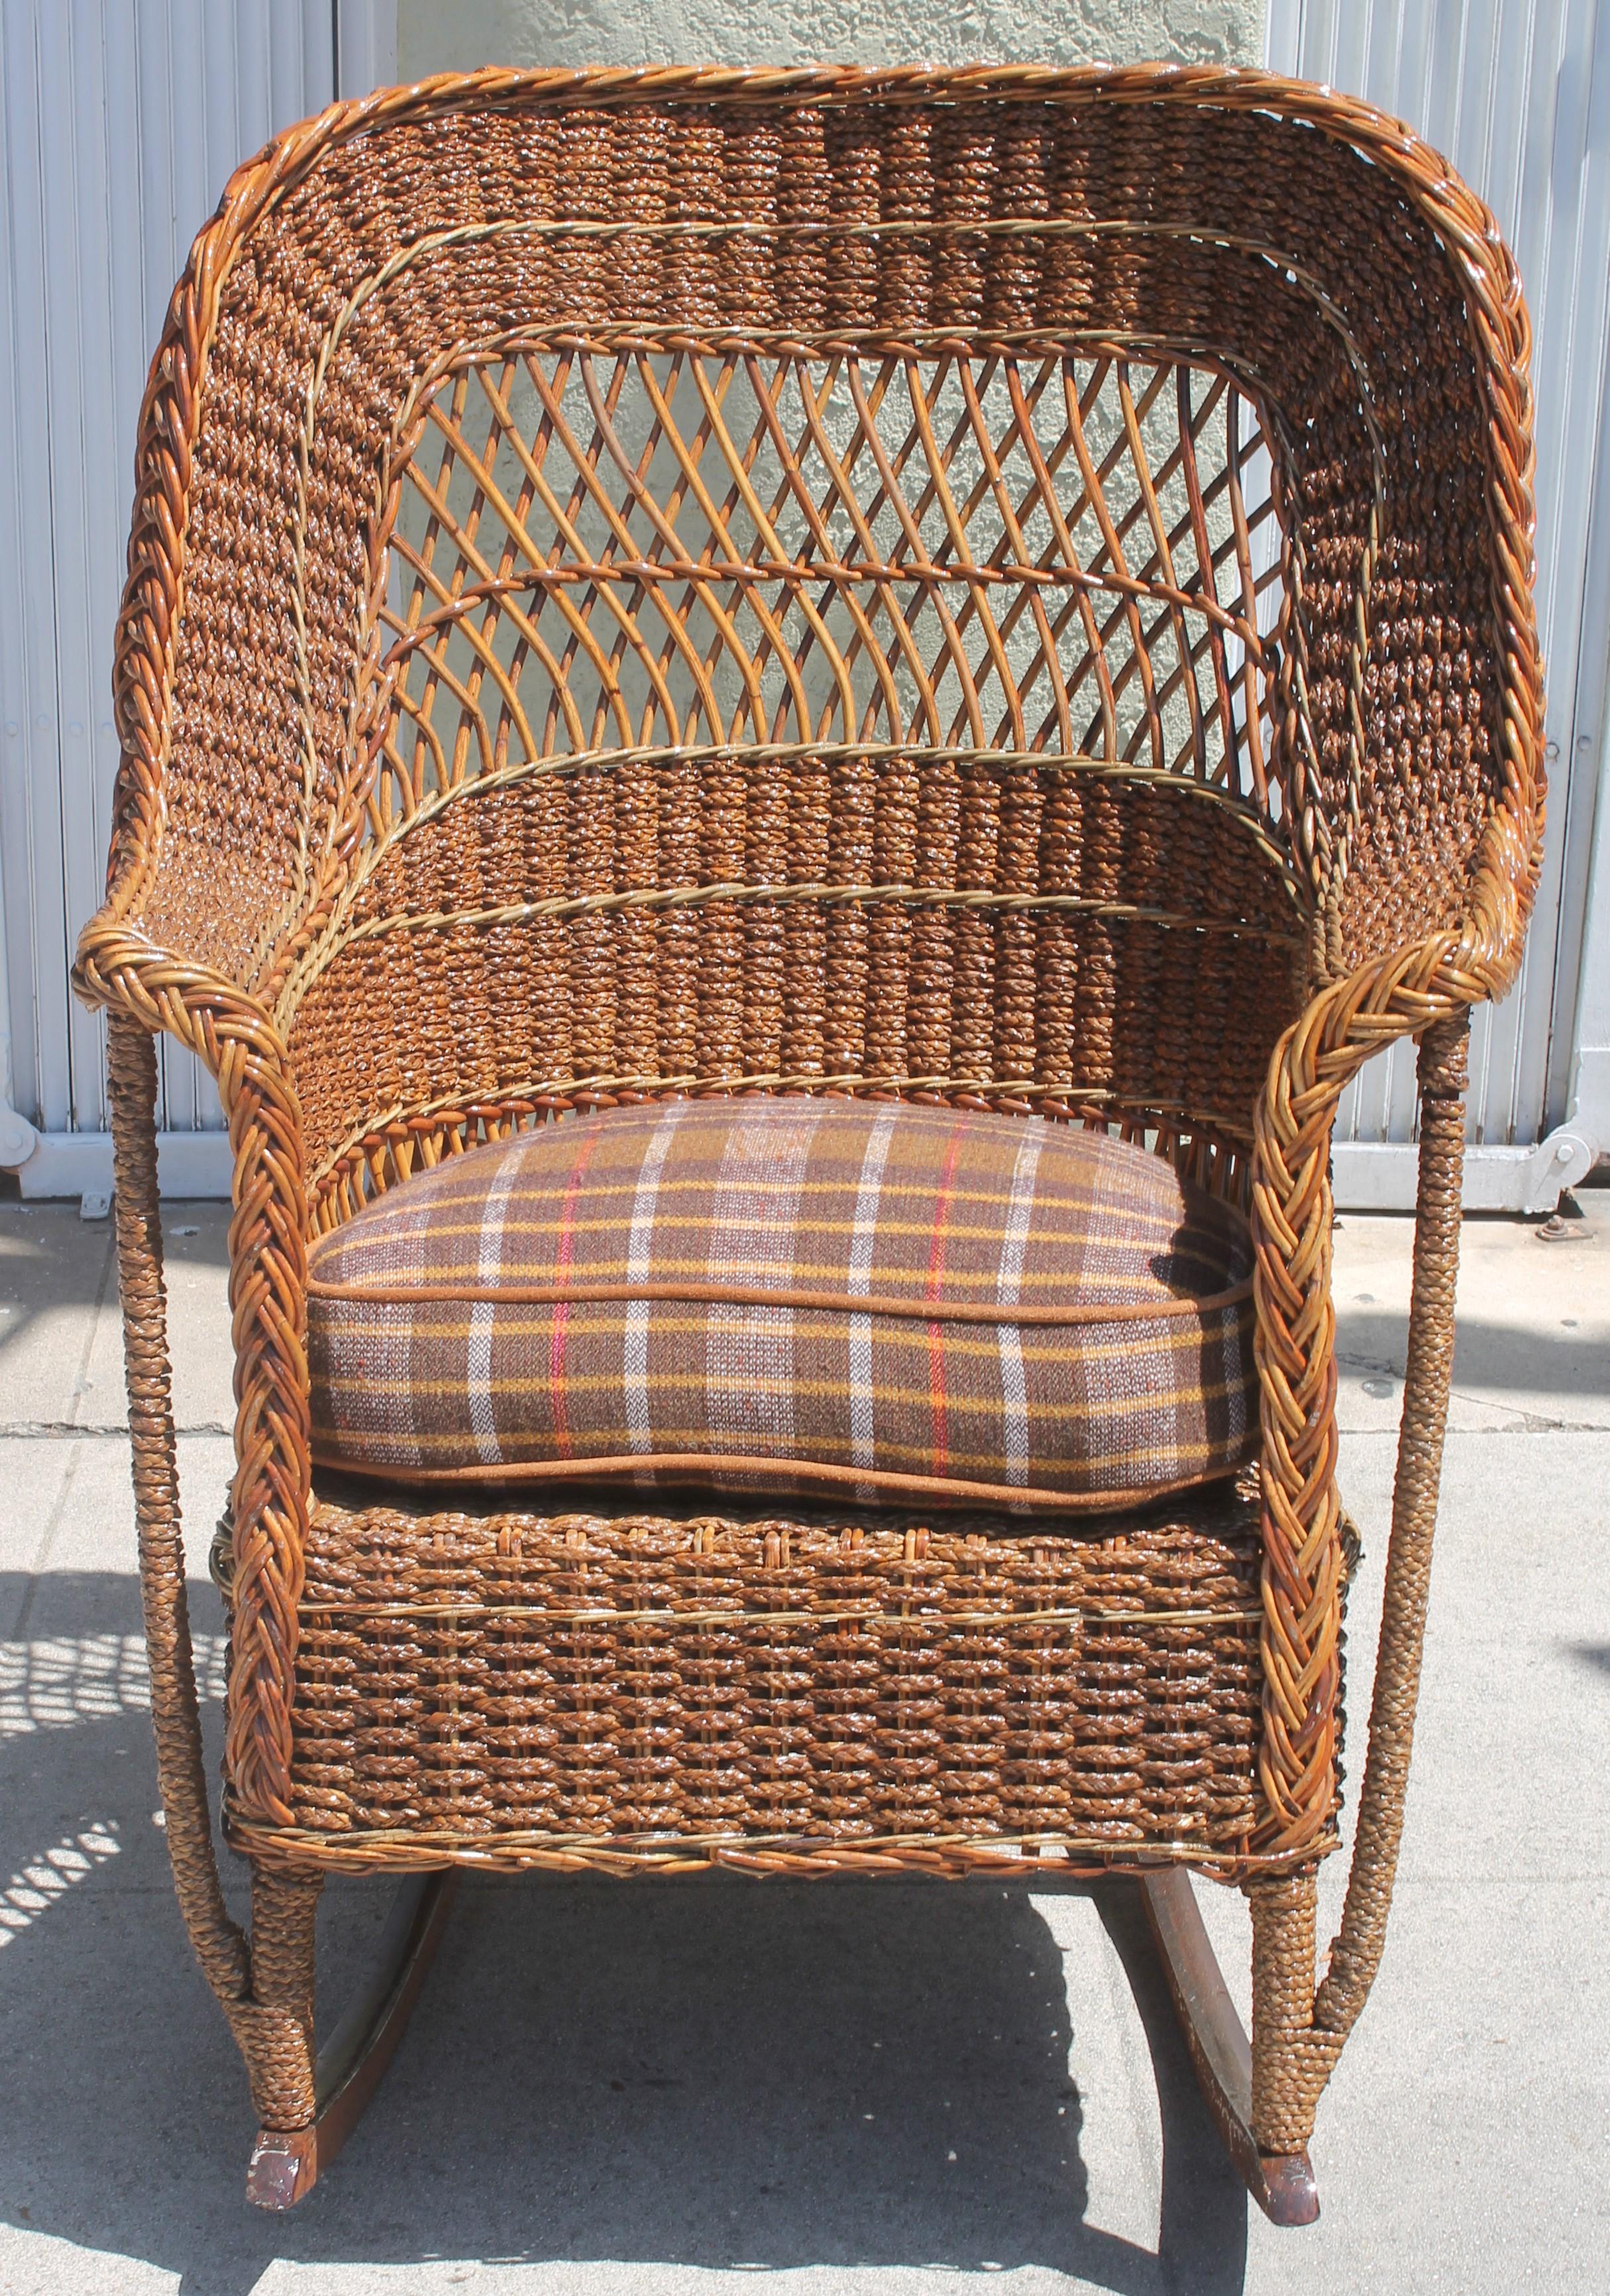 This amazing large wicker and sea grass rocking chair is from the early 20th century and in fantastic condition. It comes with a cushion as well made from a vintage blanket.